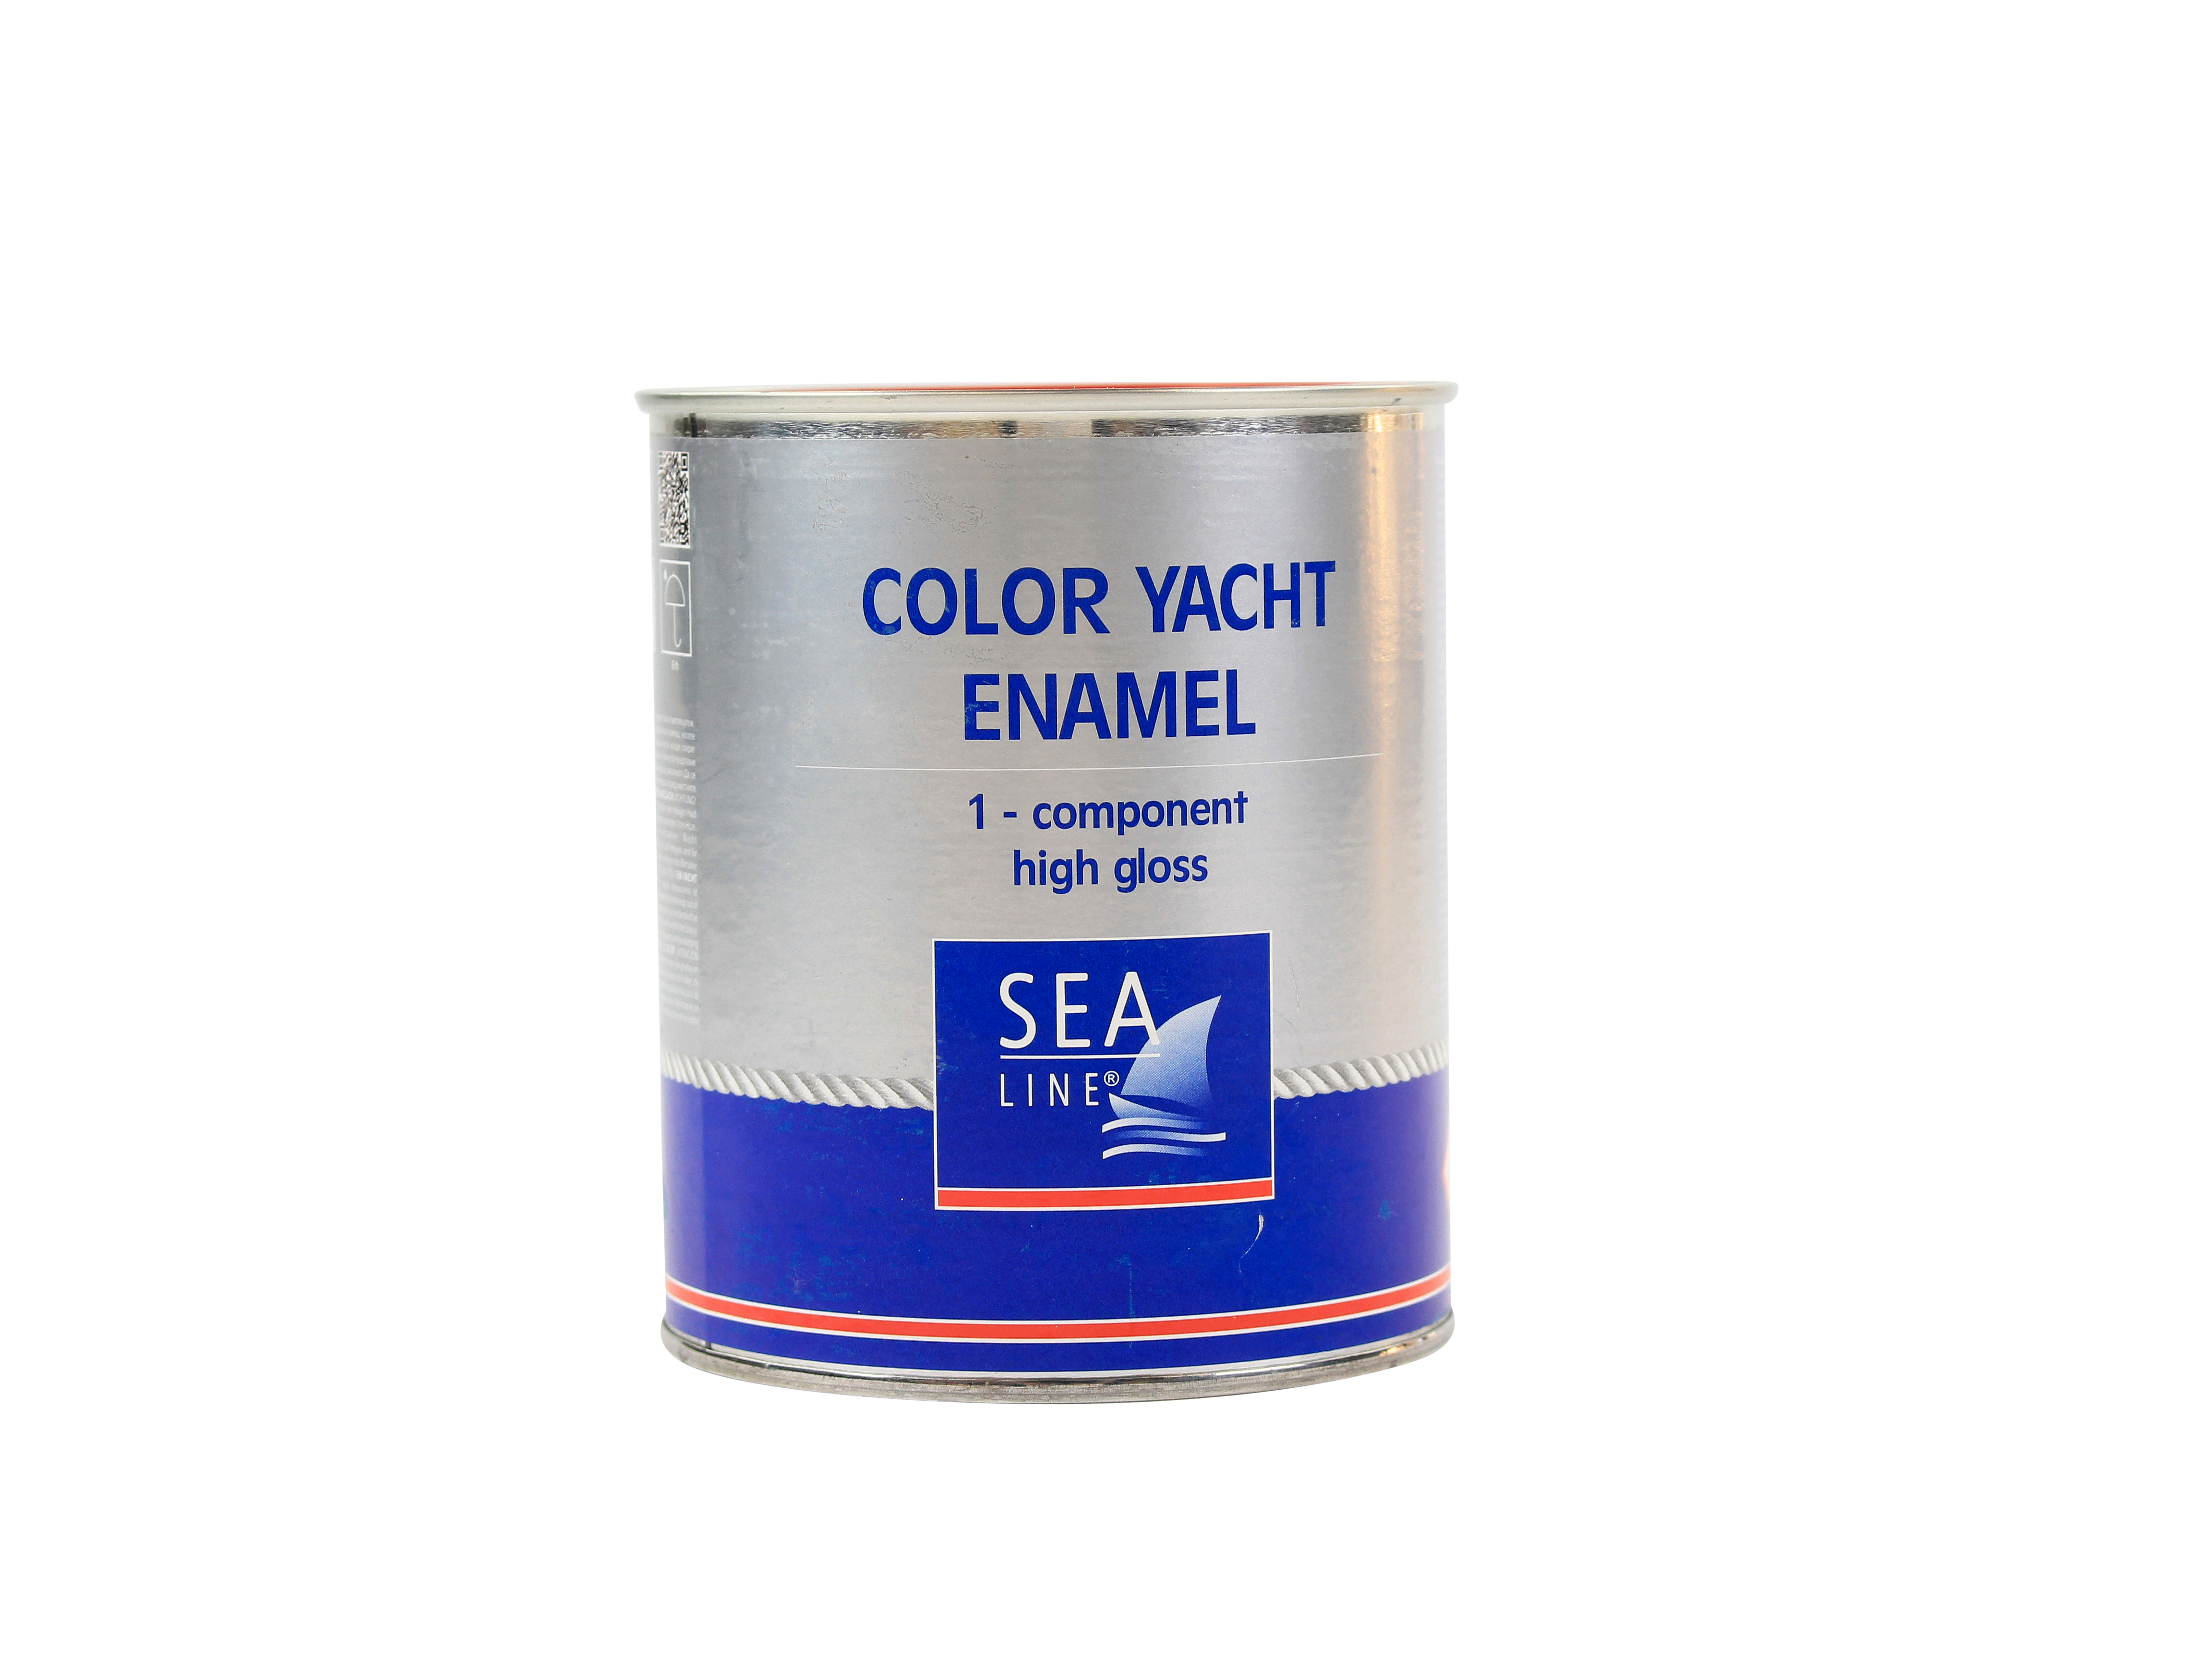 Durable enamel lacquer paint for wood, glass, plastic and metal - RAL 3000